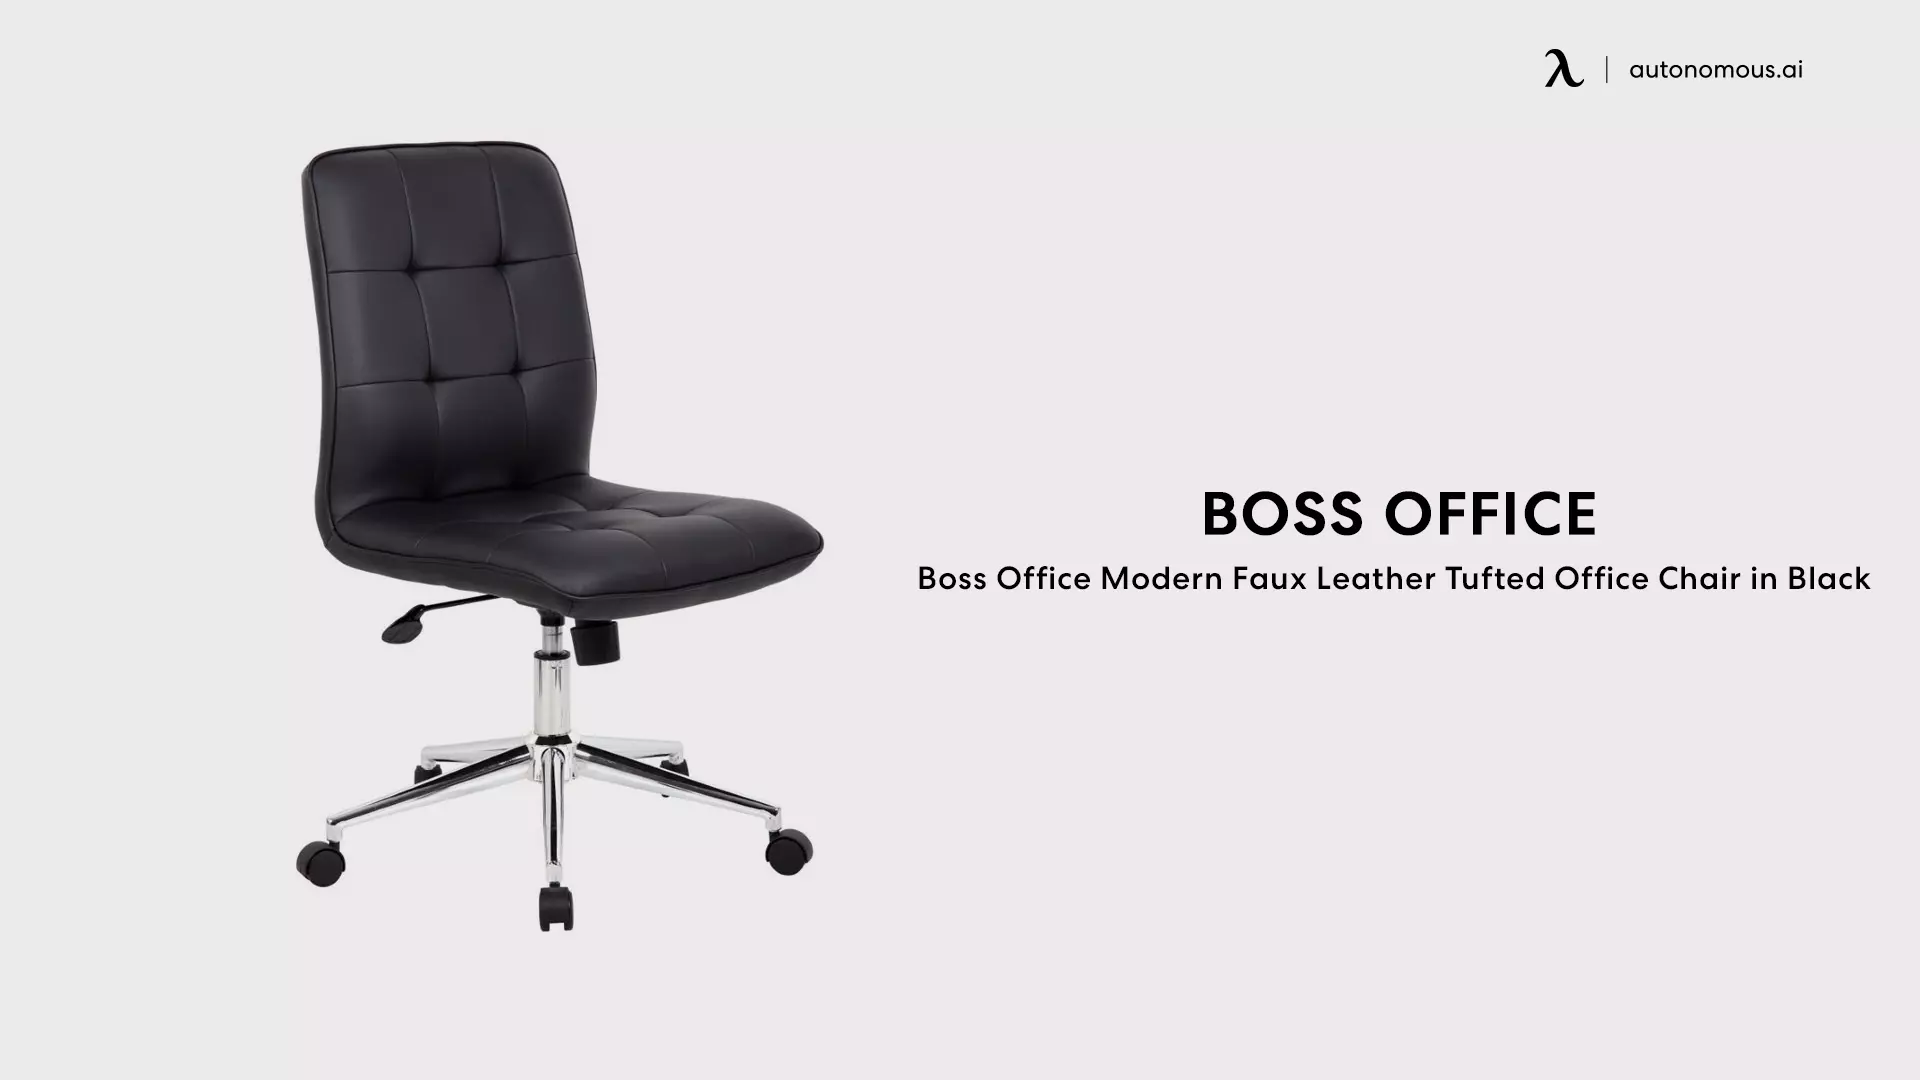 Boss Office Modern Faux Leather Tufted Office Chair in Black